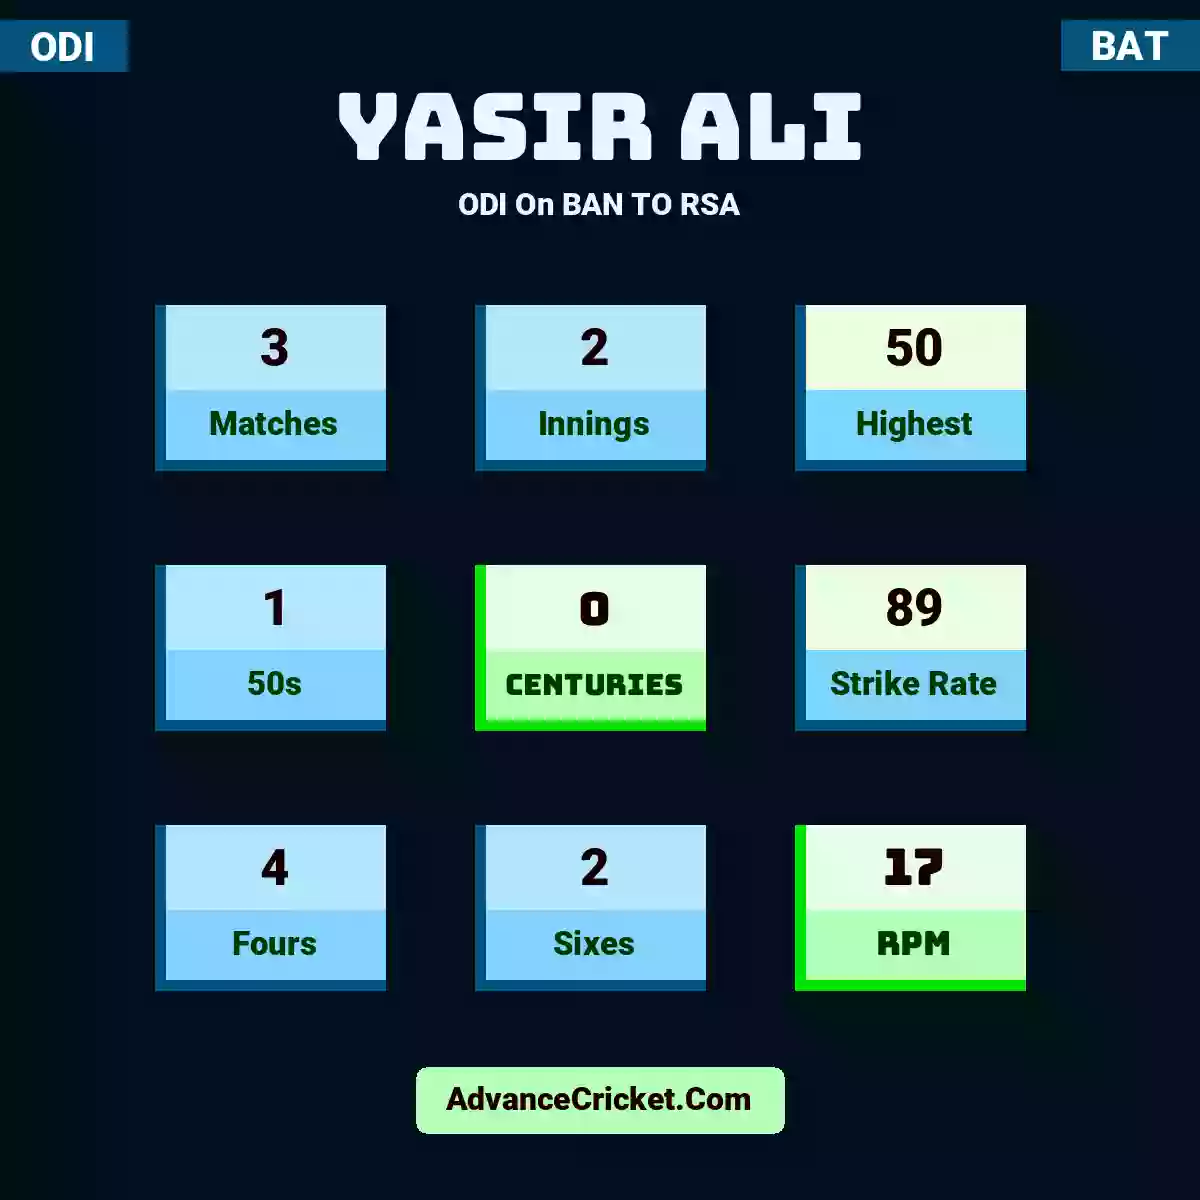 Yasir Ali ODI  On BAN TO RSA, Yasir Ali played 3 matches, scored 50 runs as highest, 1 half-centuries, and 0 centuries, with a strike rate of 89. Y.Ali hit 4 fours and 2 sixes, with an RPM of 17.